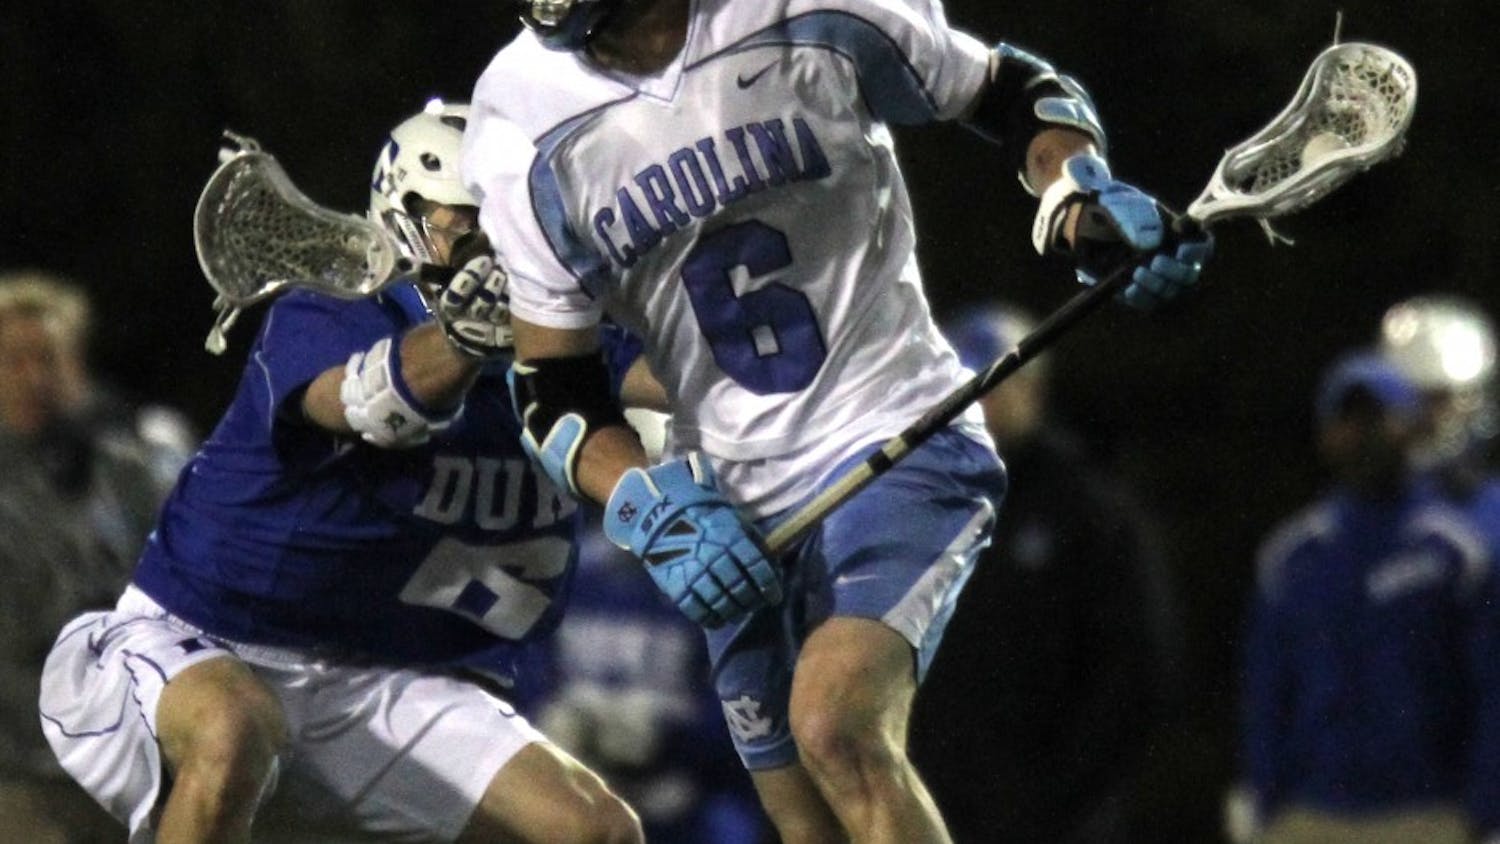 UNC Men's Lacrosse lost to Duke 11-8 on Wednesday night's ACC Tournament opener at Fetzer Field. 